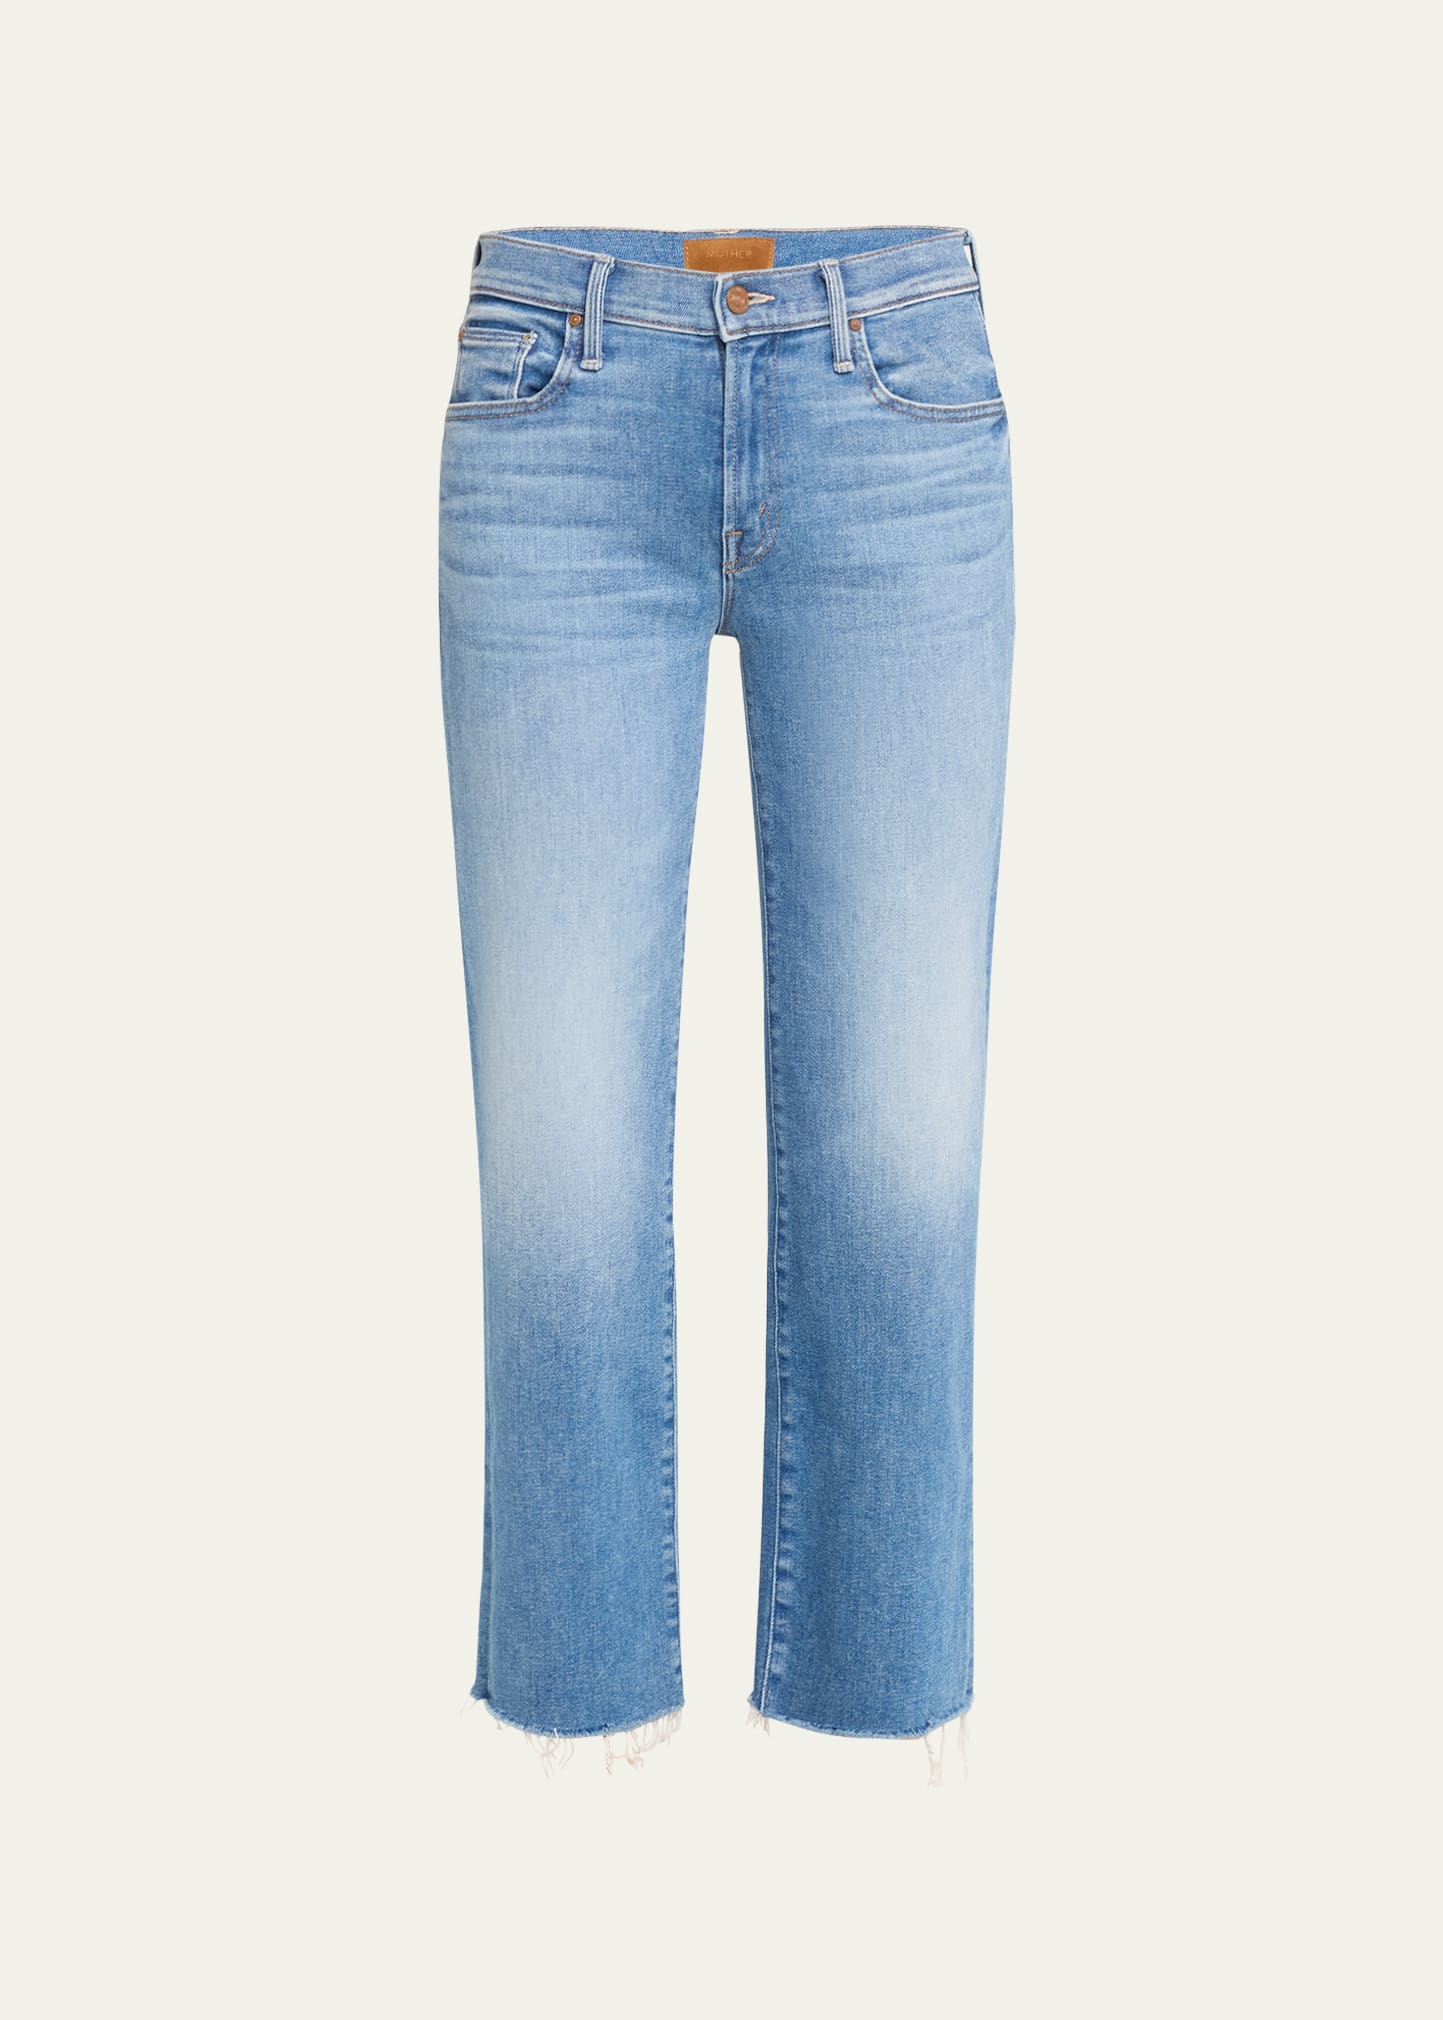 The Mid-Rise Rambler Zip Ankle Fray Jeans